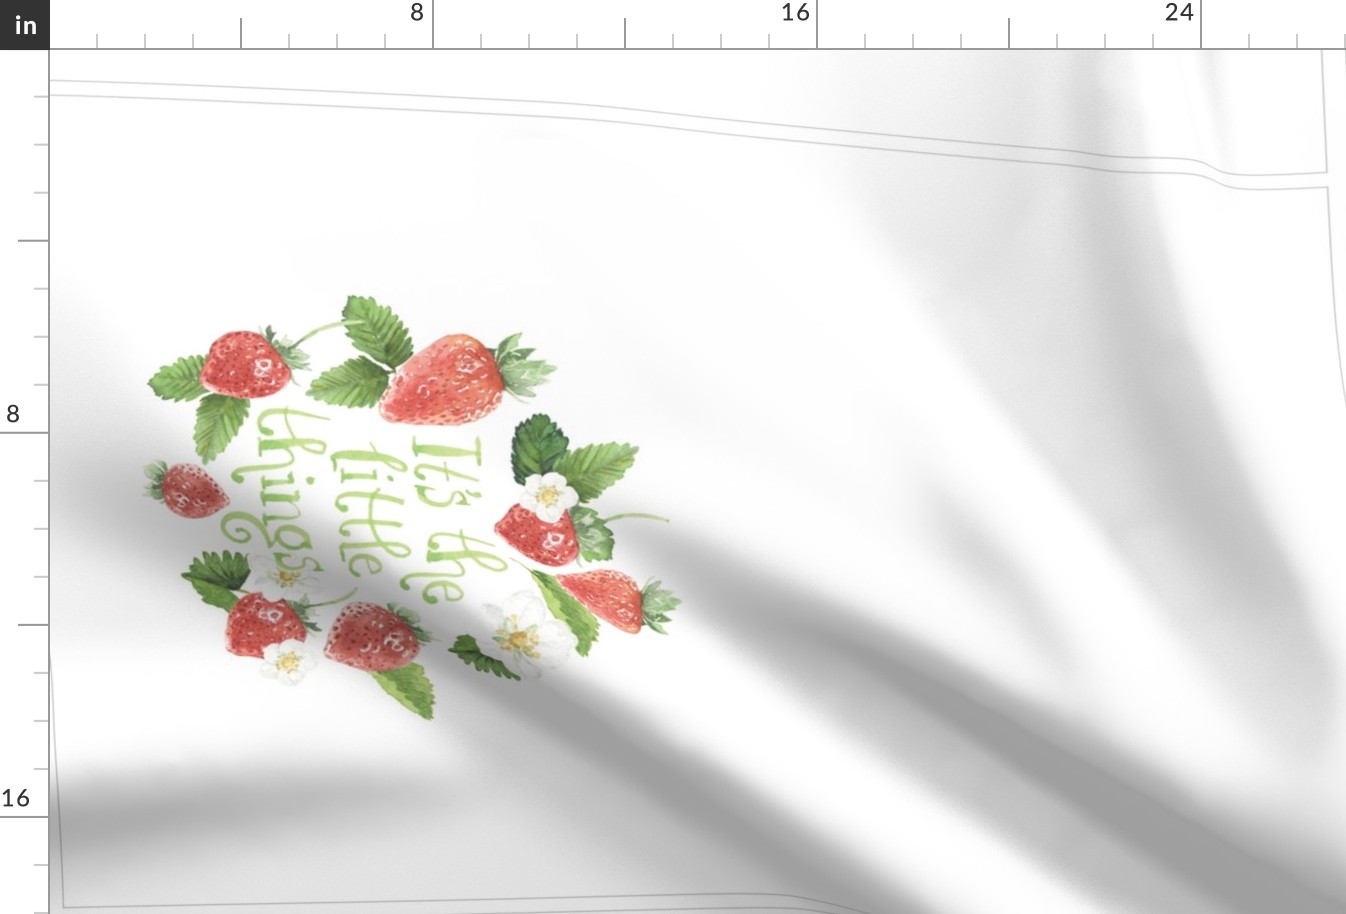 "It's the Little Things" Strawberry Tea Towel